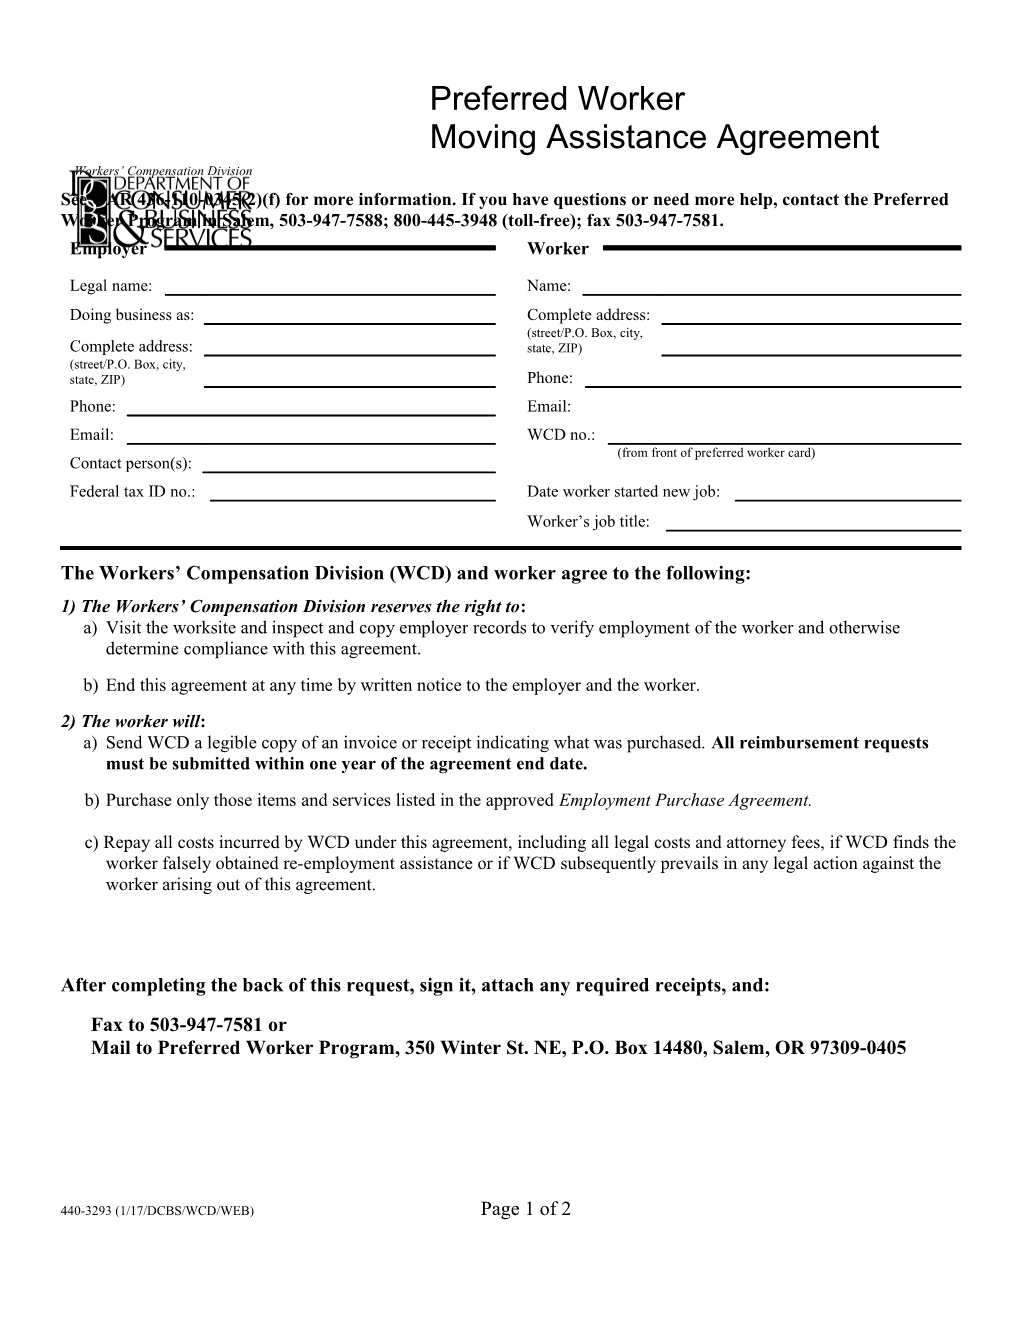 Preferred Worker Moving Assistance Agreement